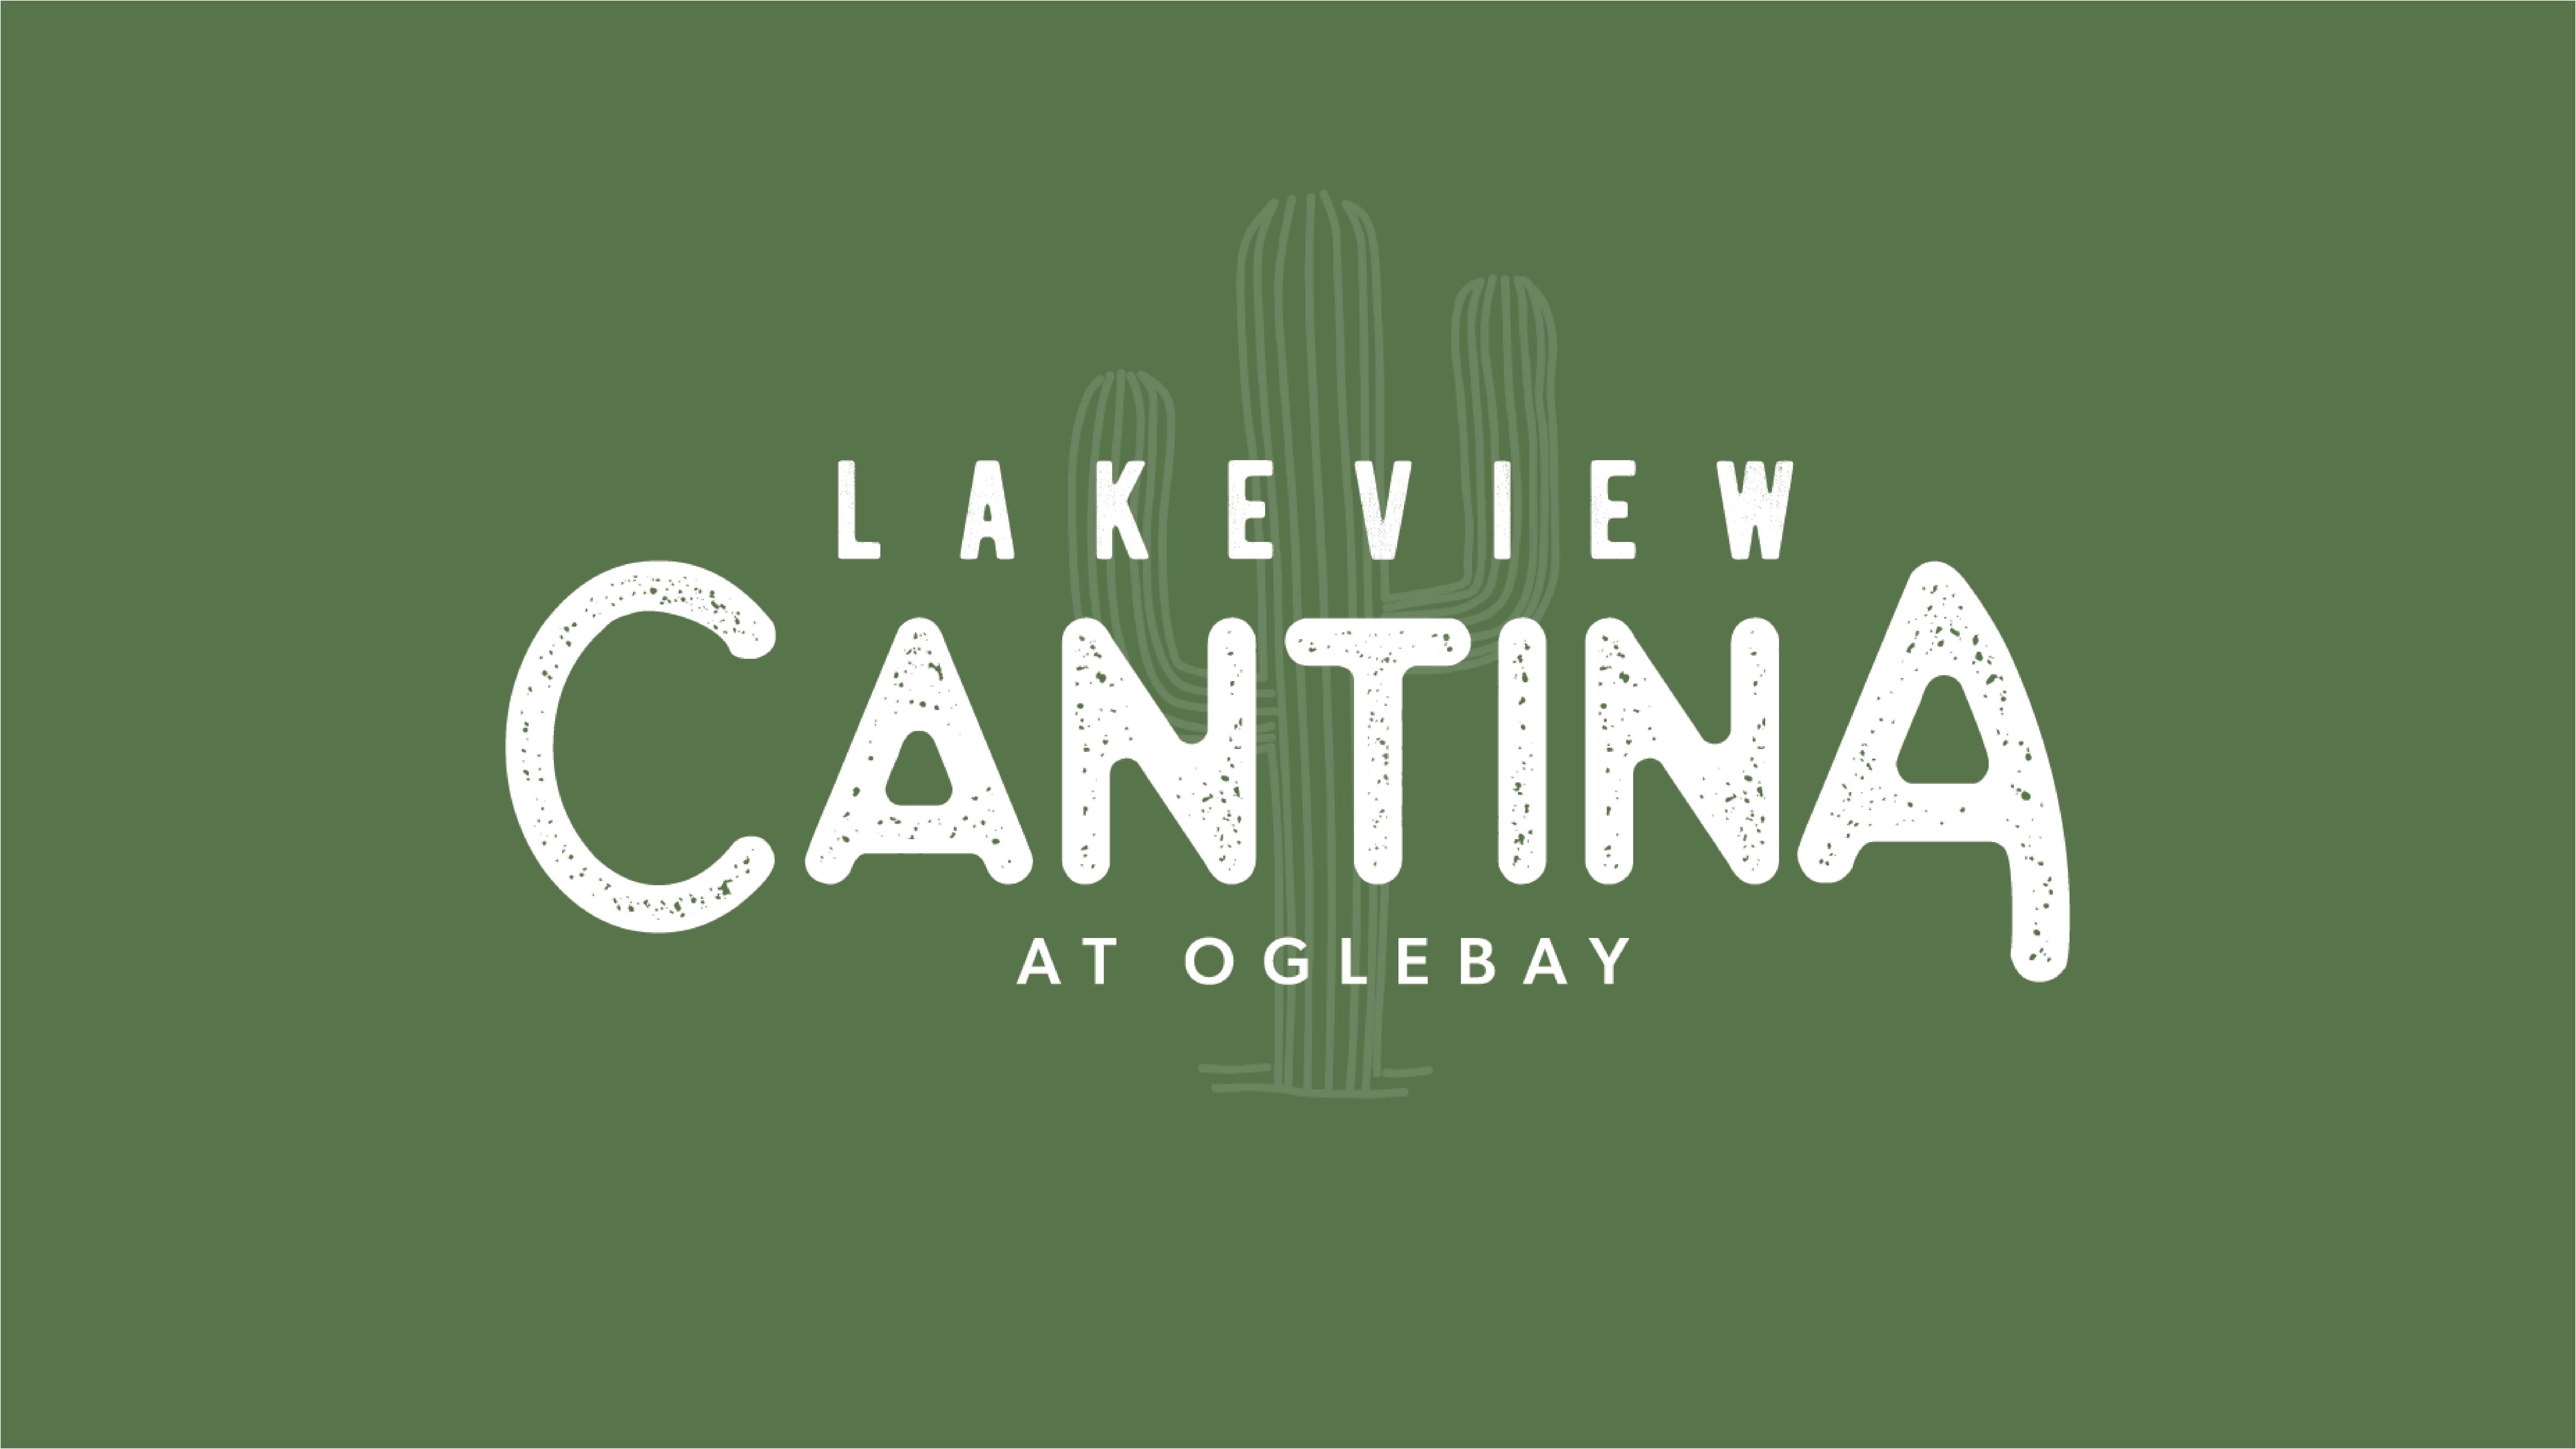 Lakeview Cantina photo